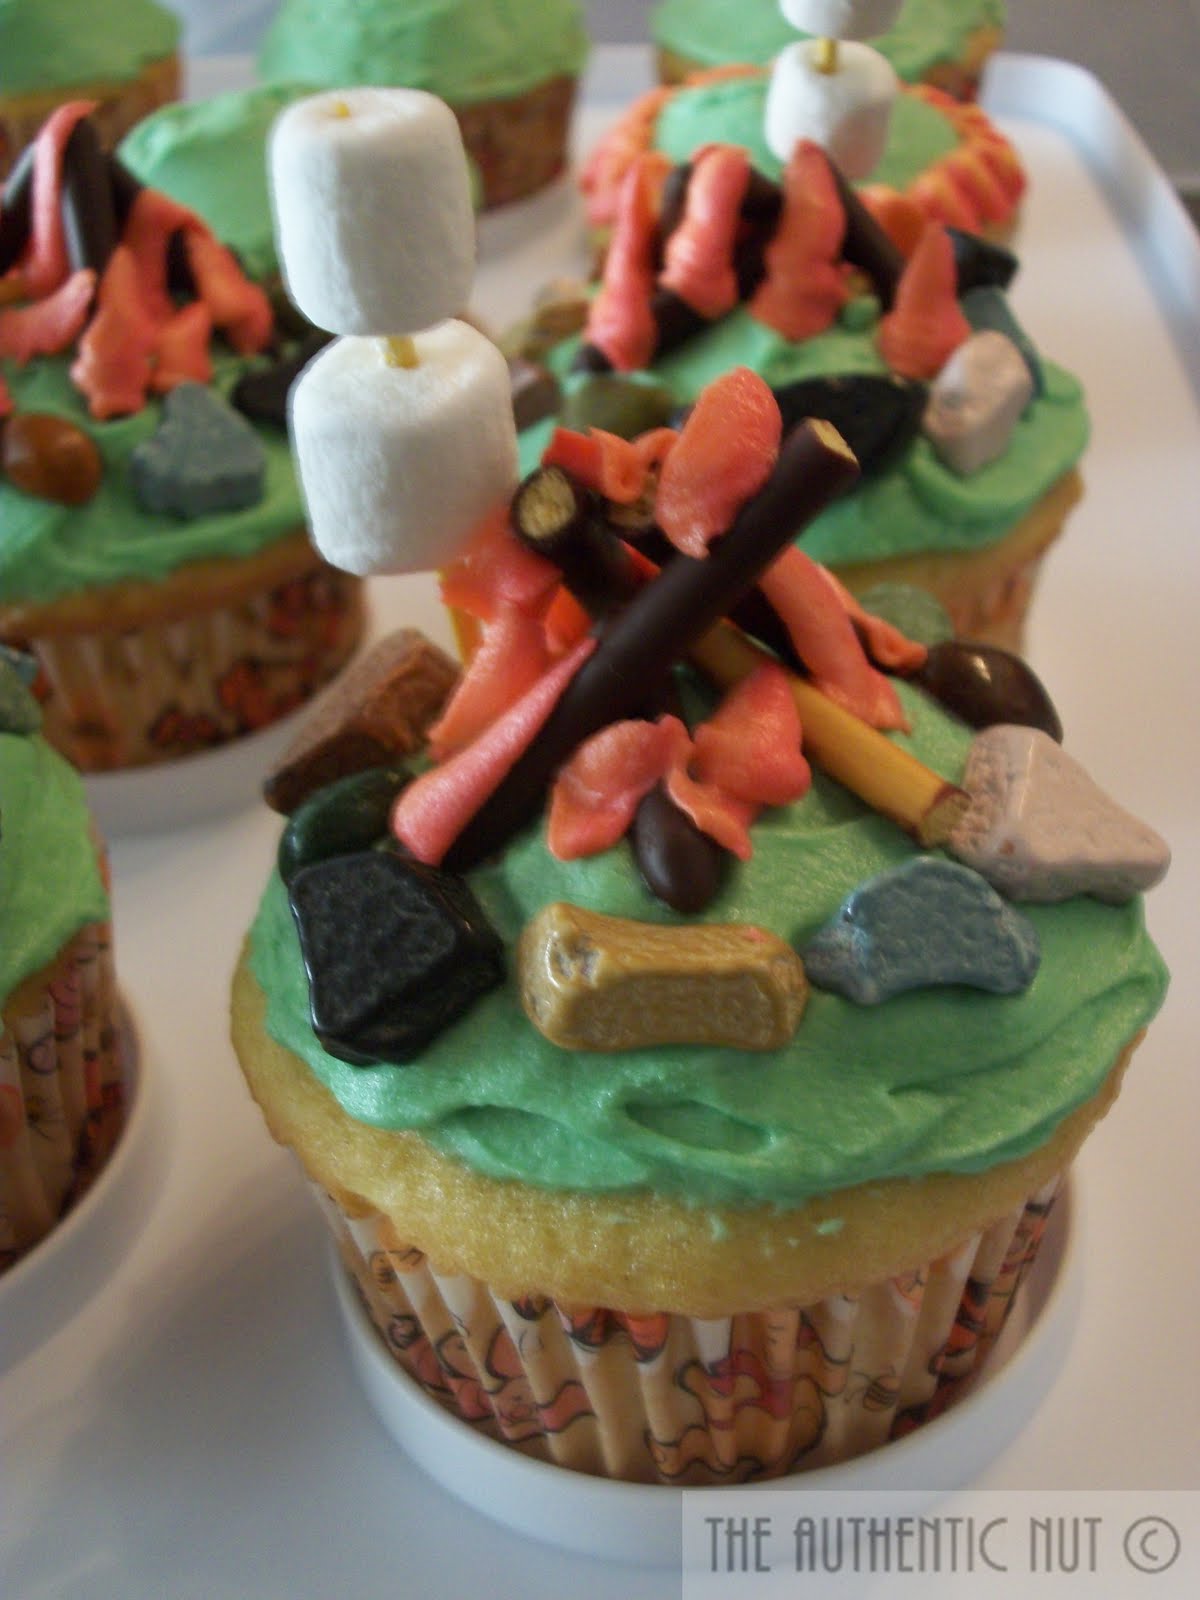 fun  make. margarine buttercream cupcakes! cute to and Campfire Super to how make using